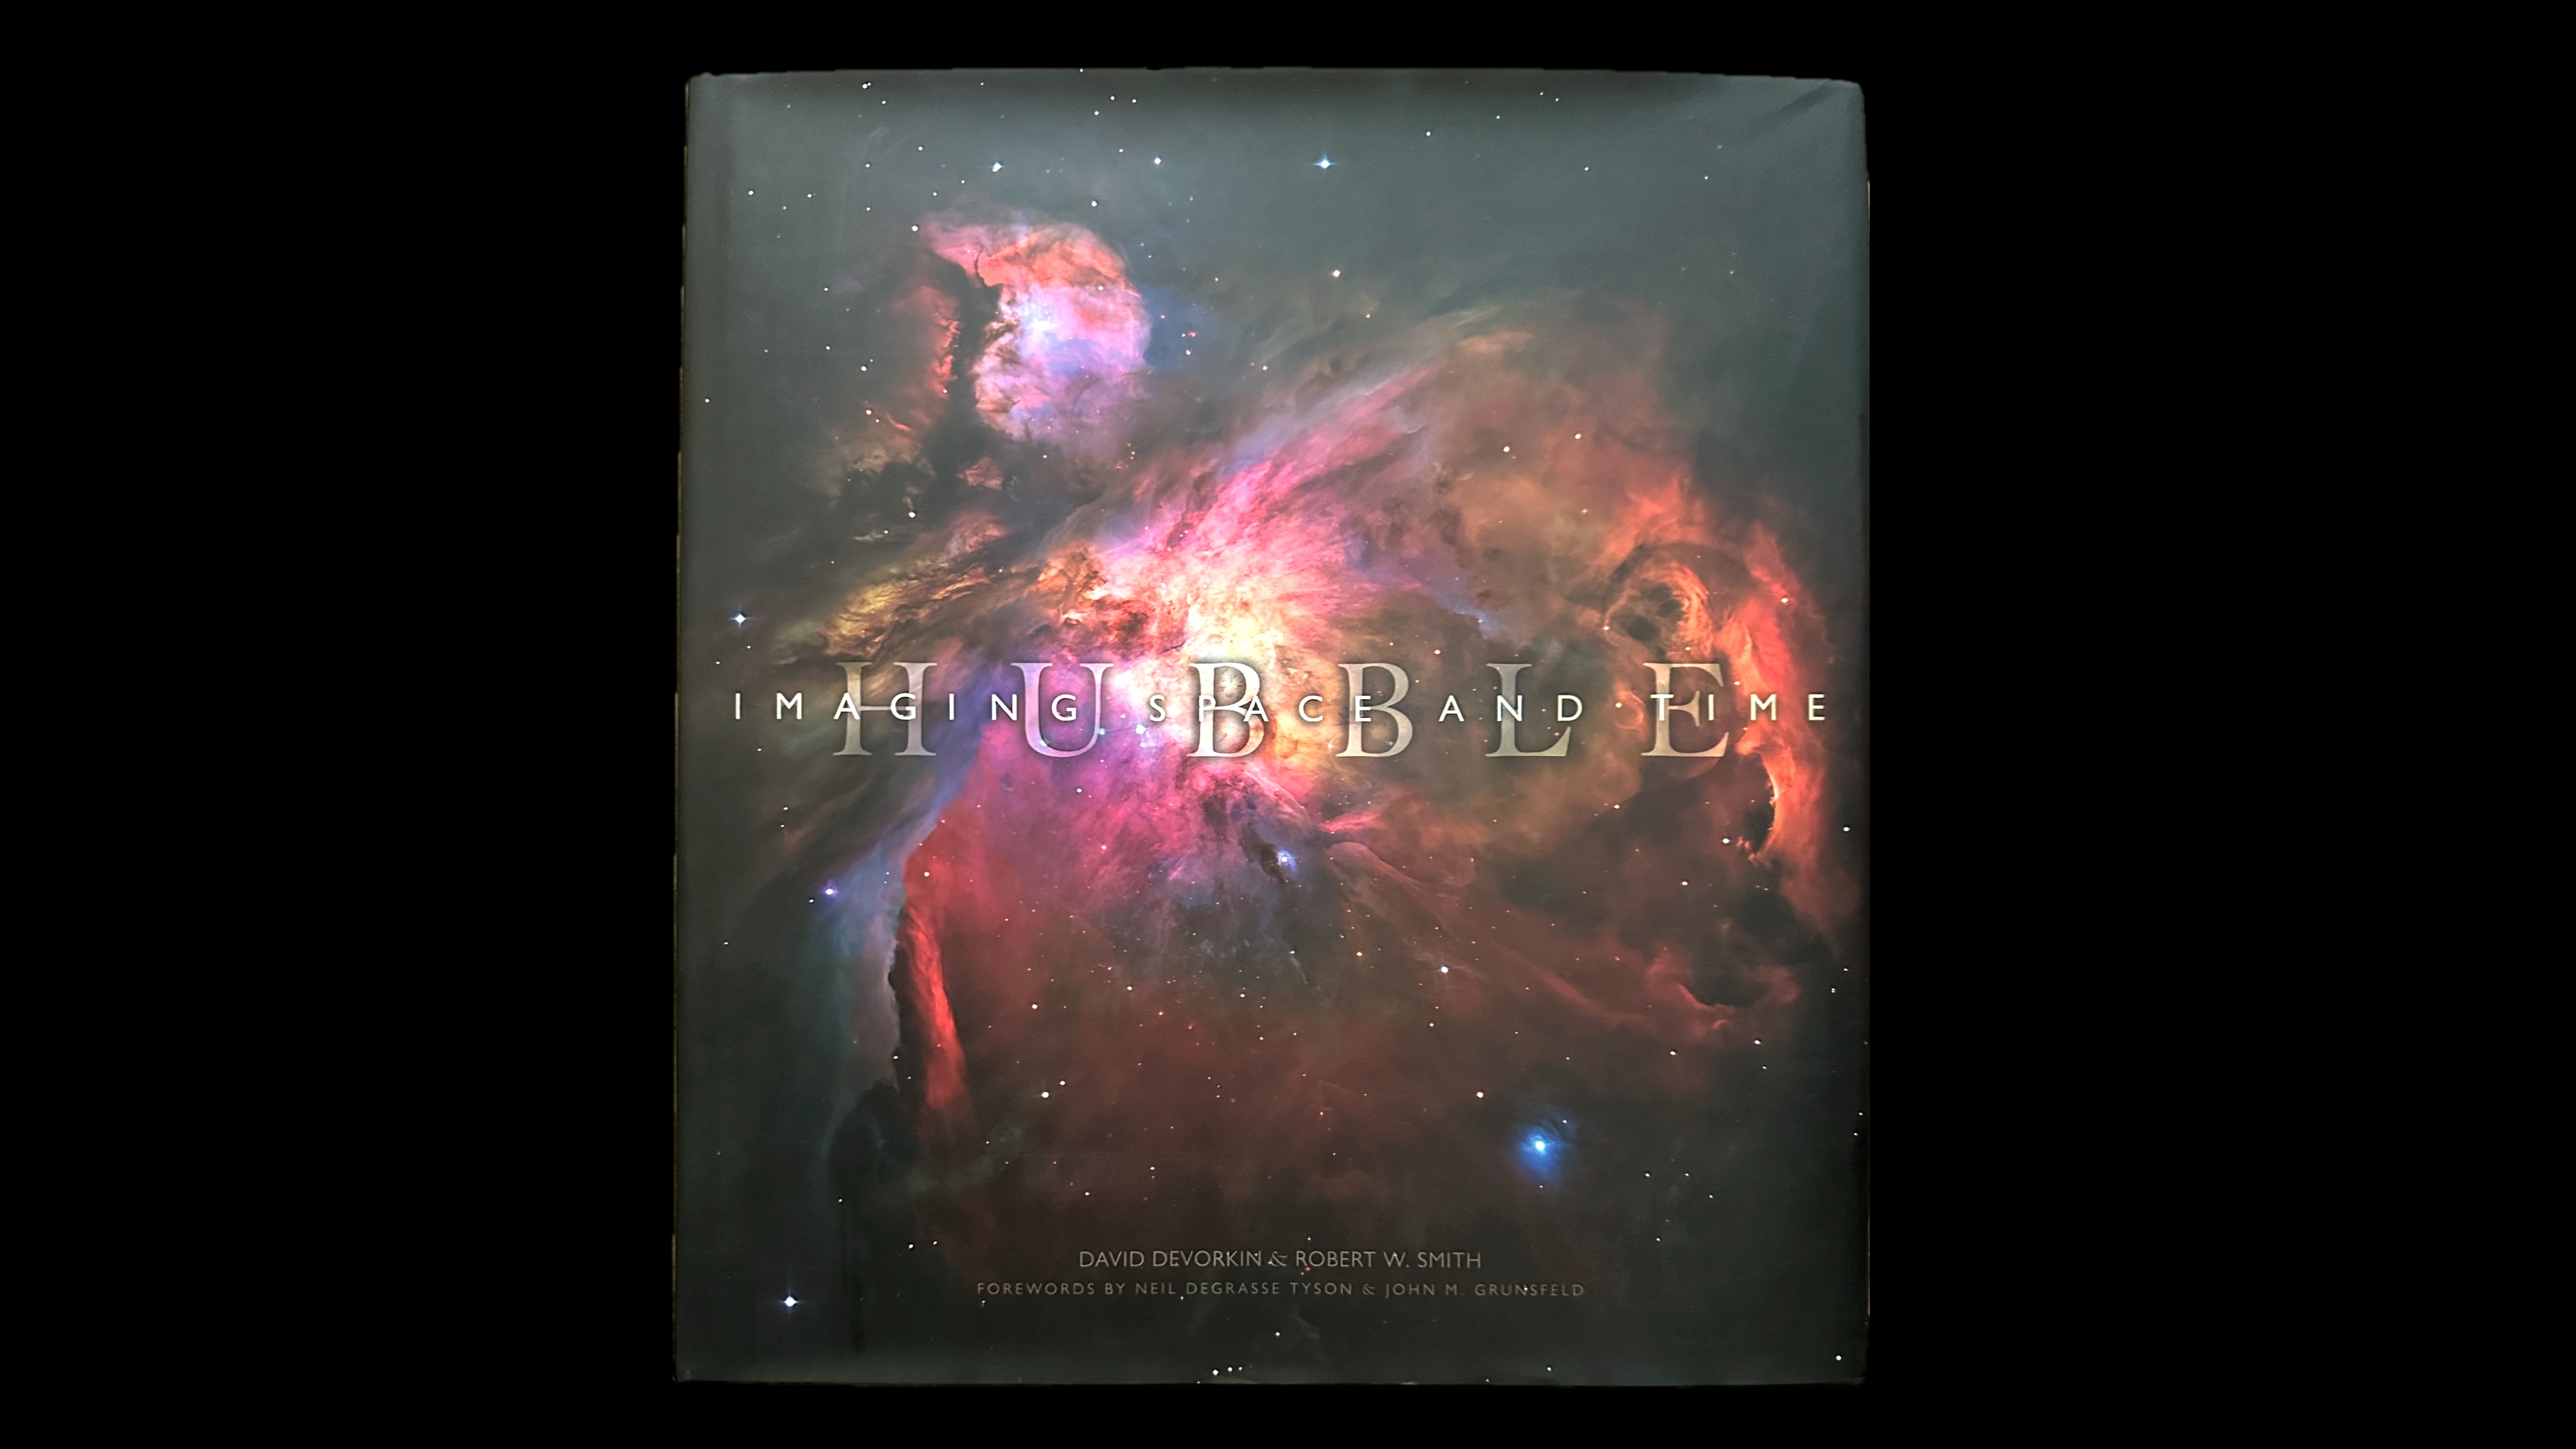 The cover of a national geographic book with Hubble's image of the Orion Nebula on it.